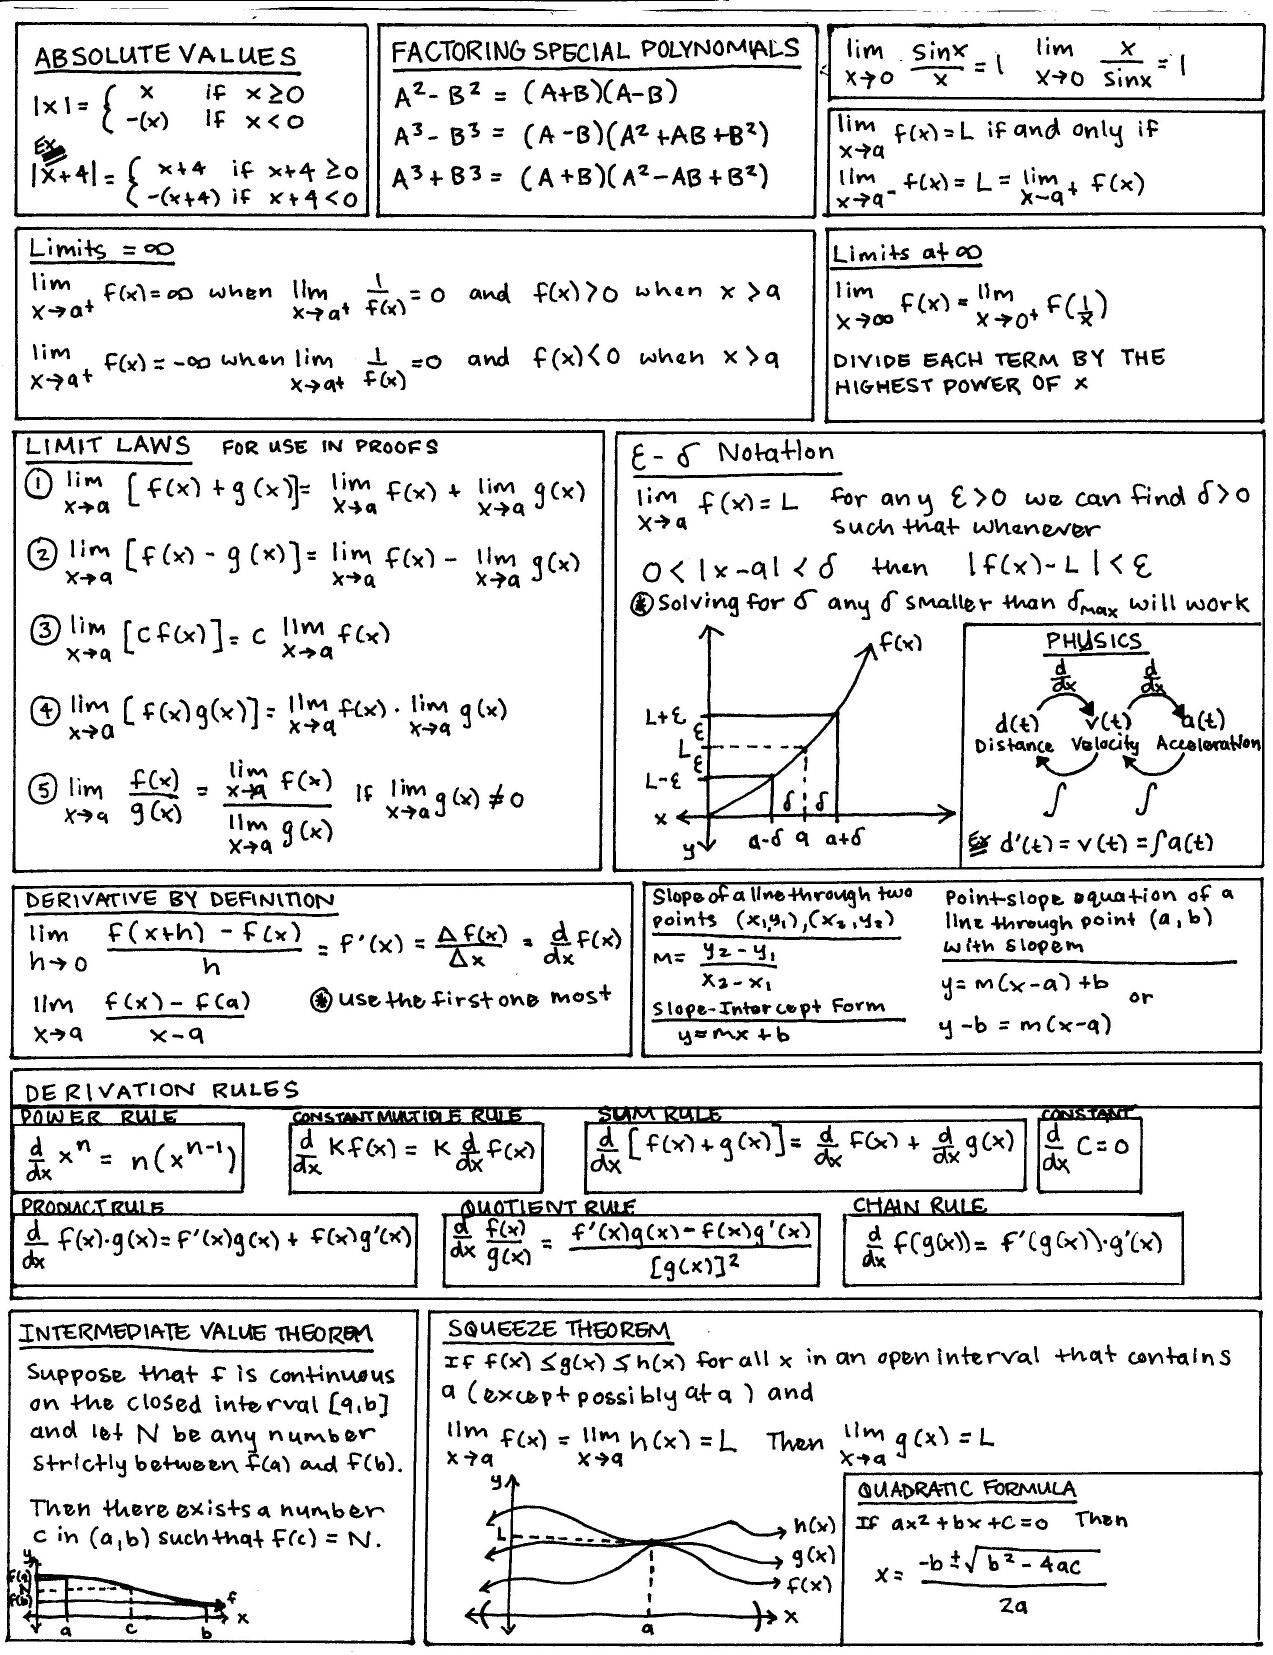 calculus cheat sheet – I made a sheet much like this when re-teaching myself calculus before grad school & the GACE…